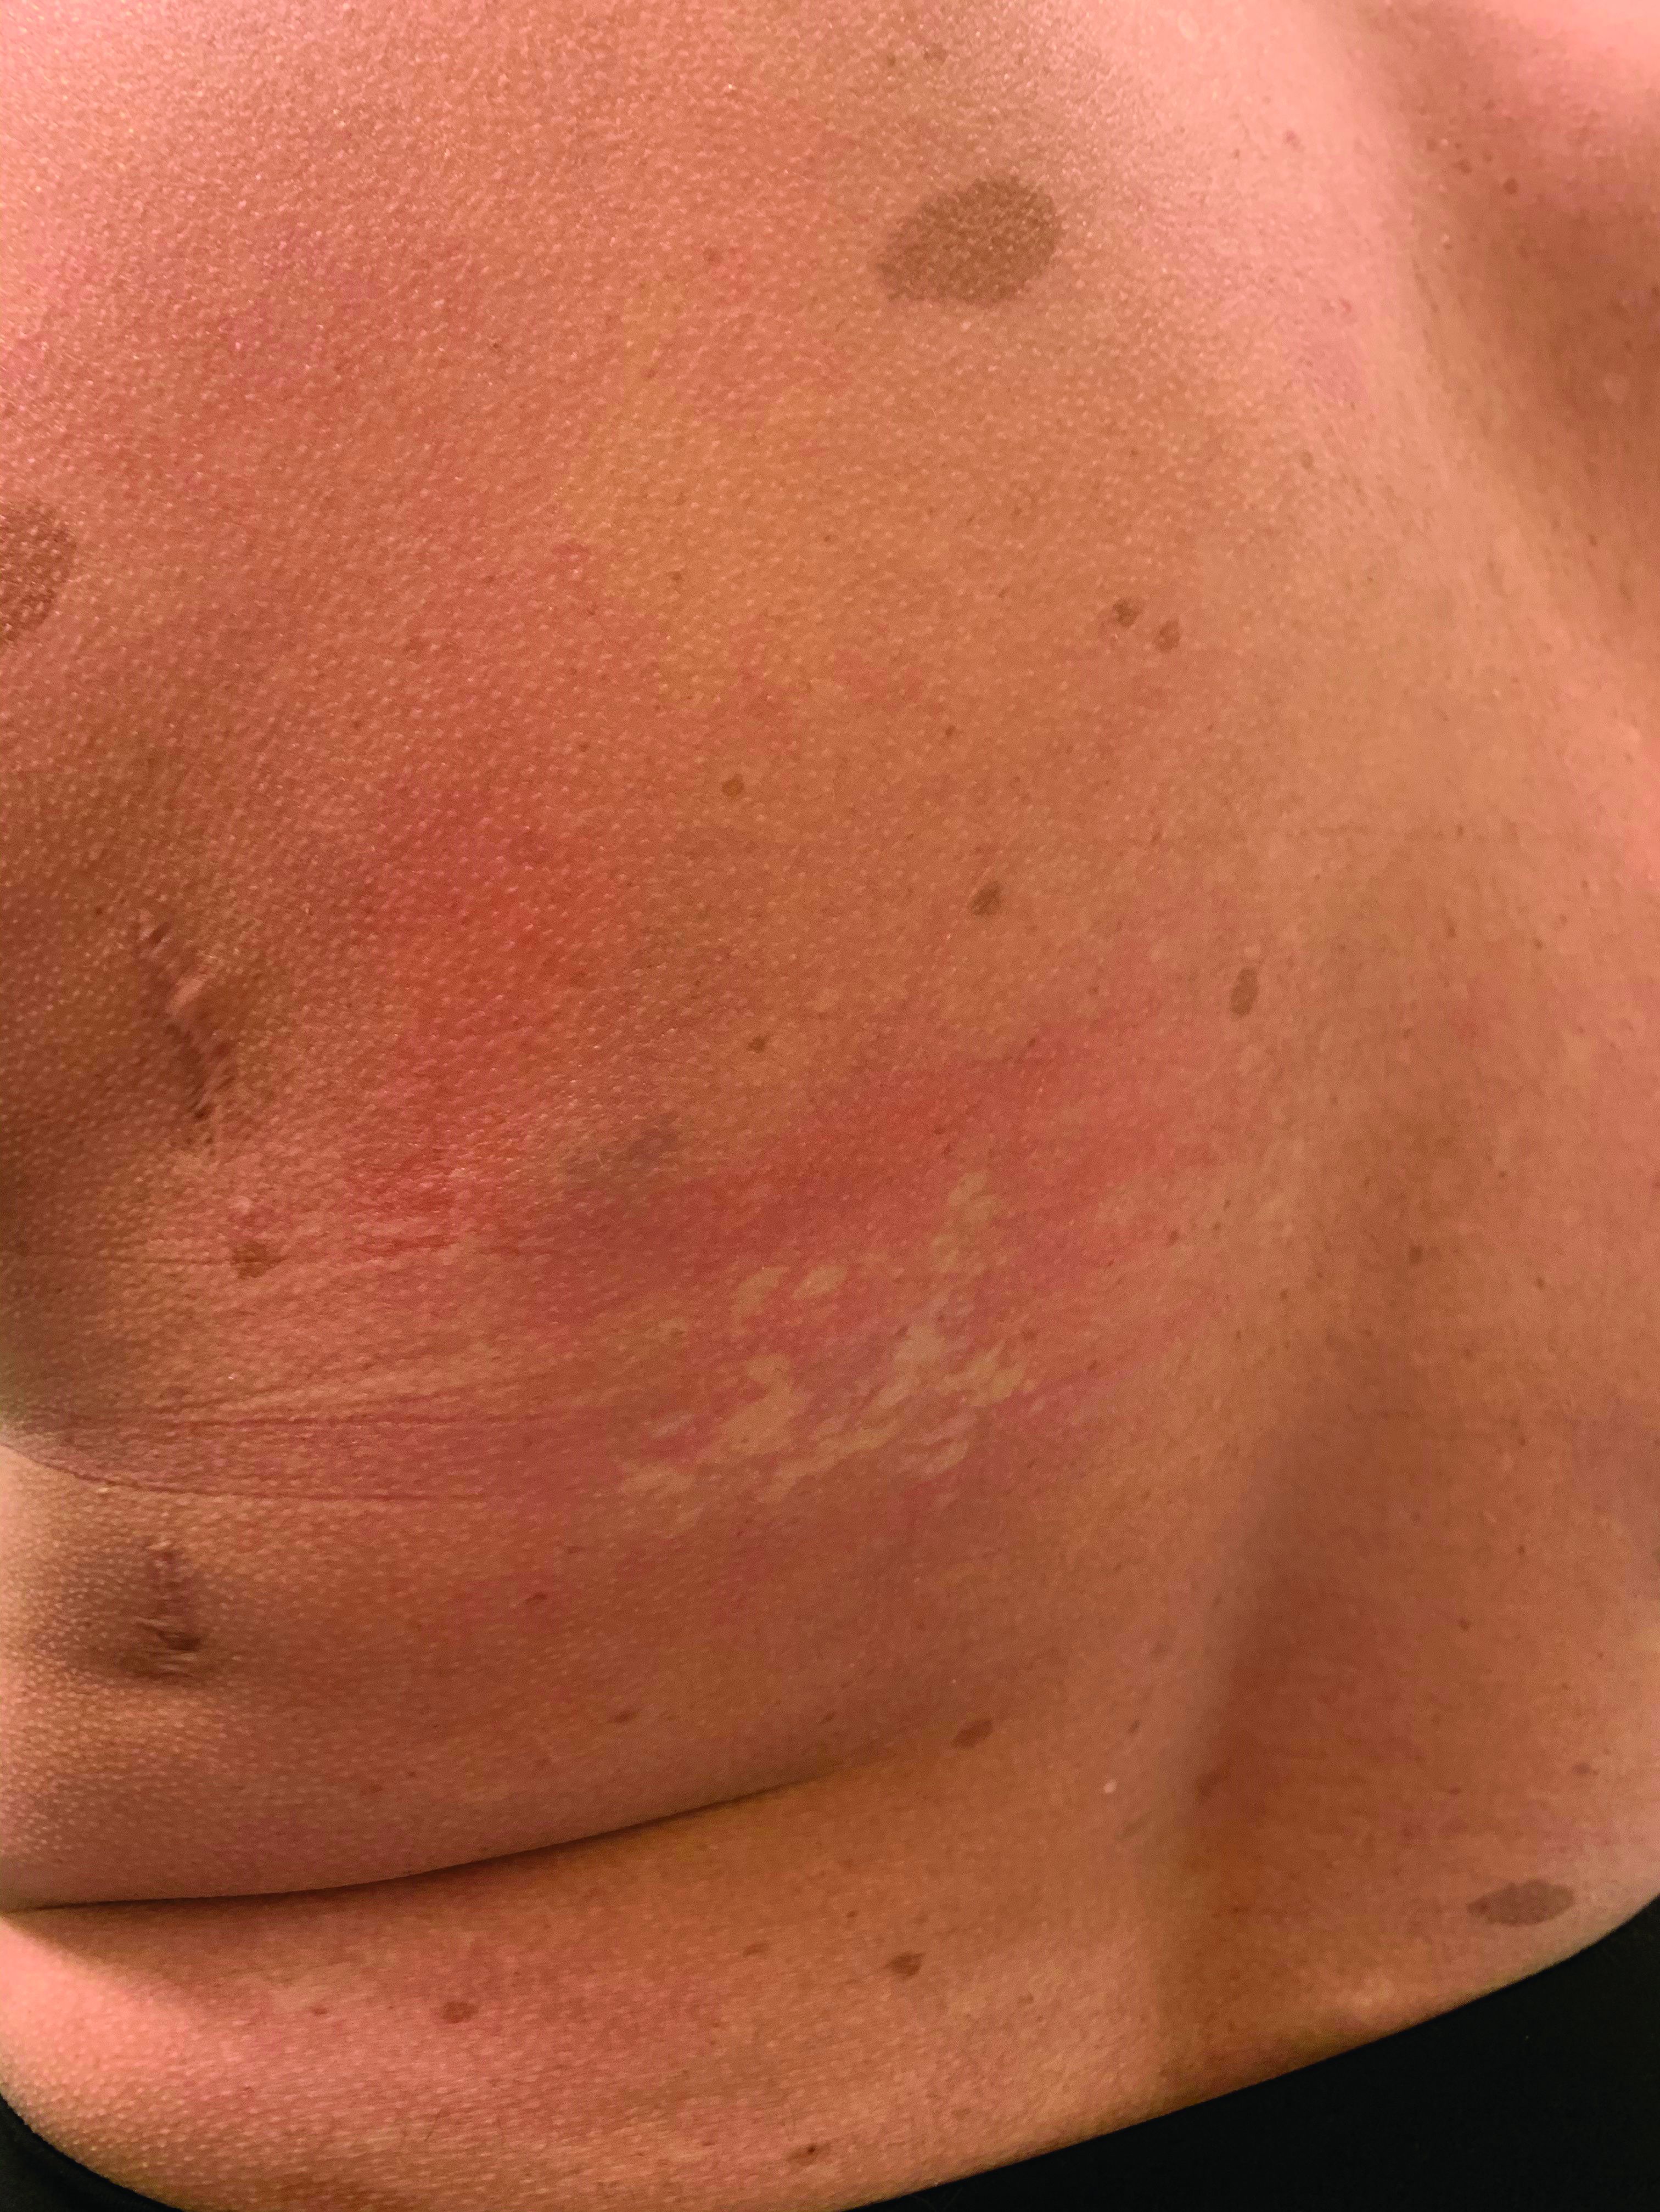 A girl presents with blotchy, slightly itchy spots on her chest, back